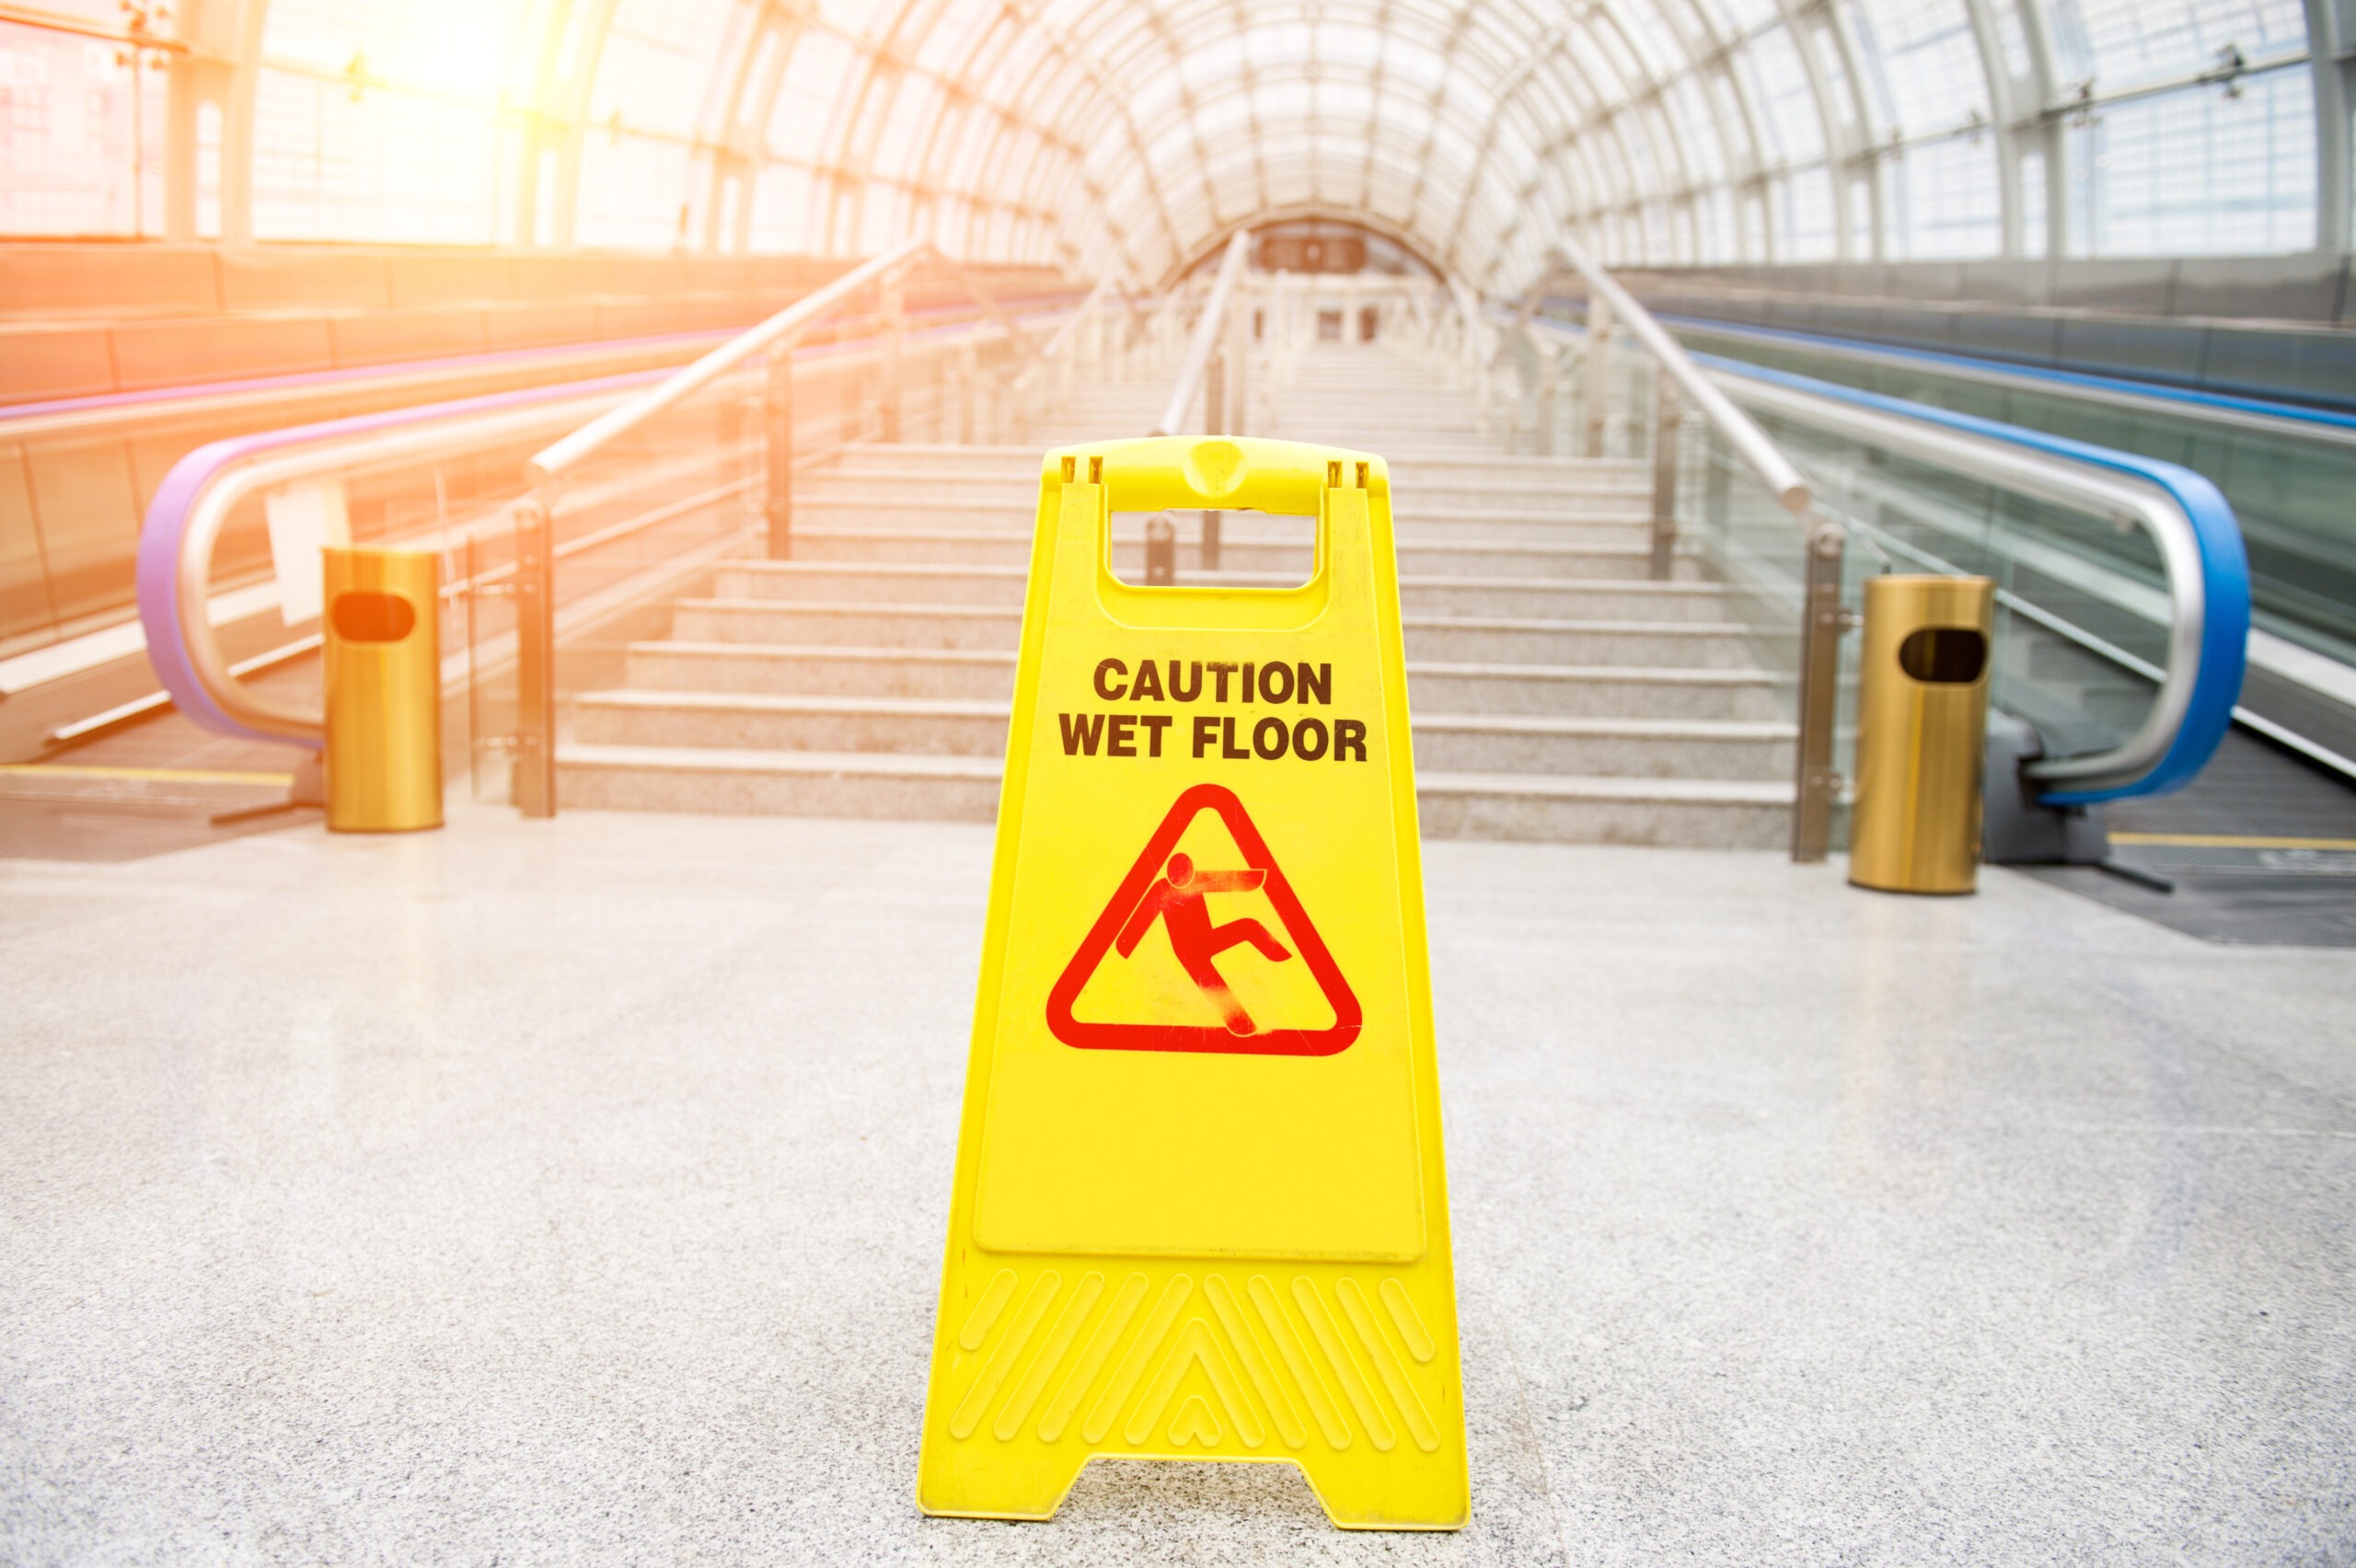 If you were injured due to the dangerous conditions on someone else's property, a slip and fall injury lawyer in California can help you file a claim.